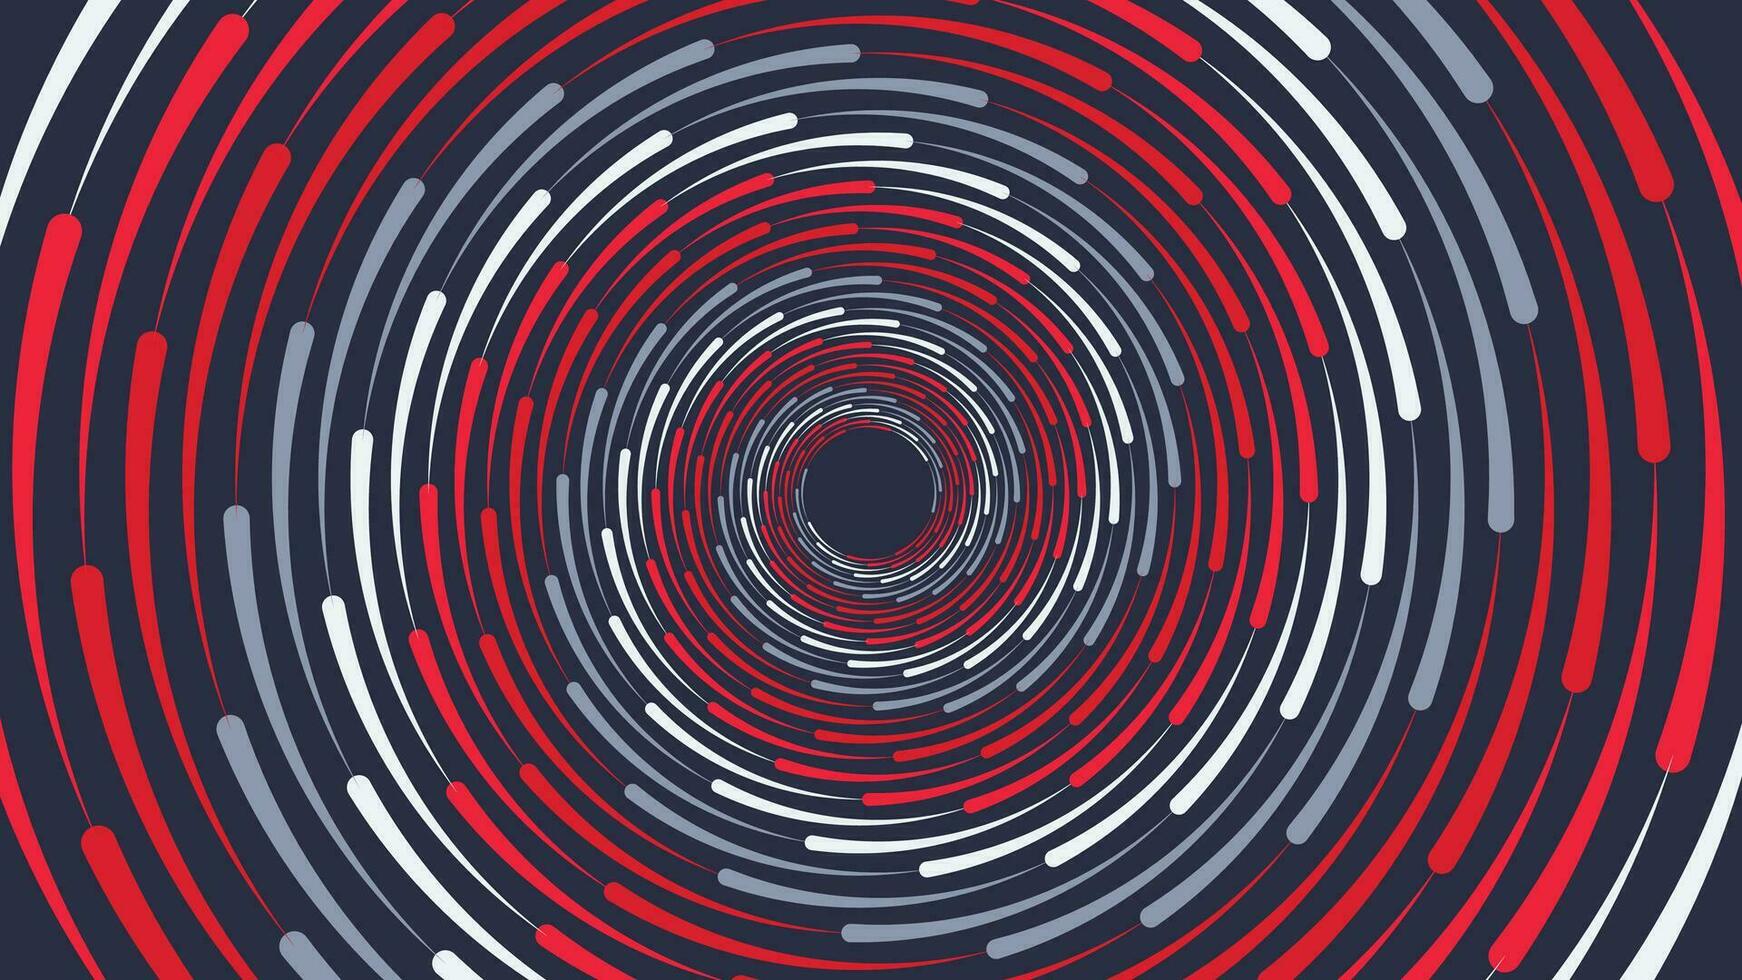 Abstract dotted spiral vortex background for your creative project. You can used it as a banner or party flyer background. This can also be used as data cycle of information. vector